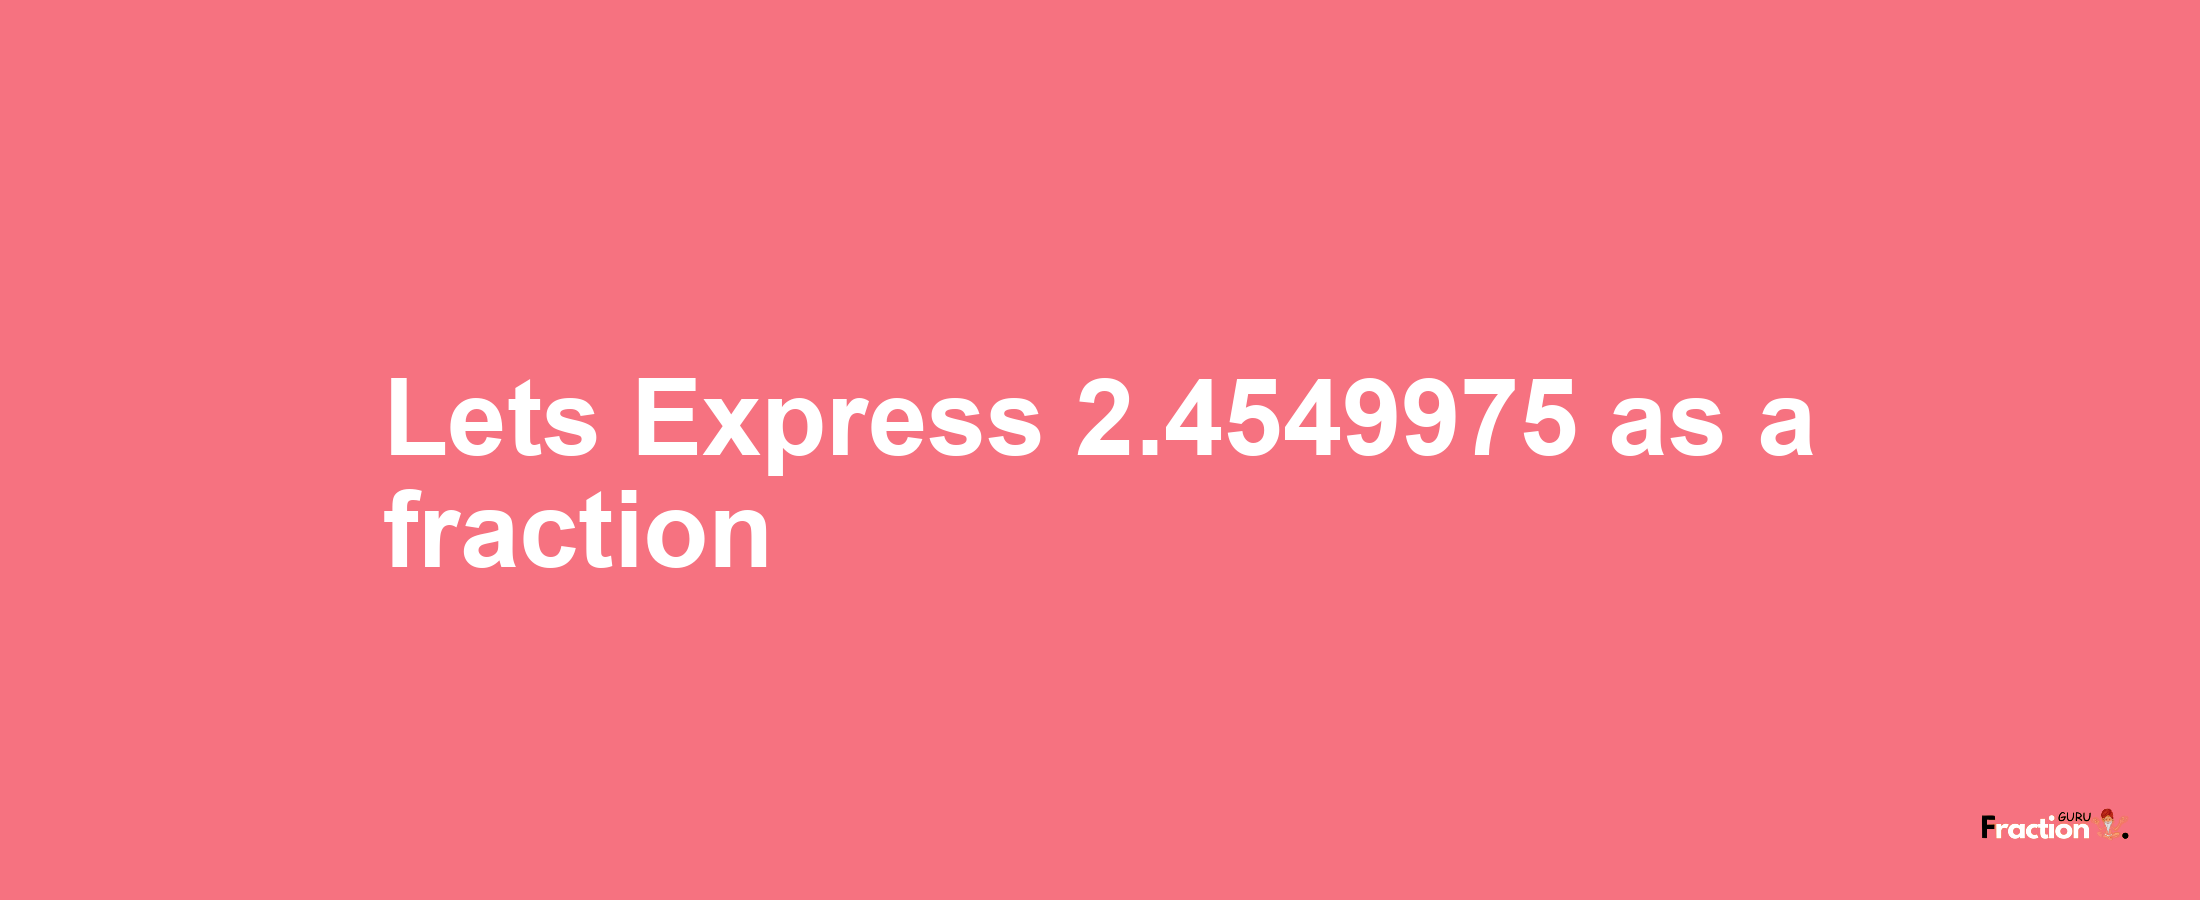 Lets Express 2.4549975 as afraction